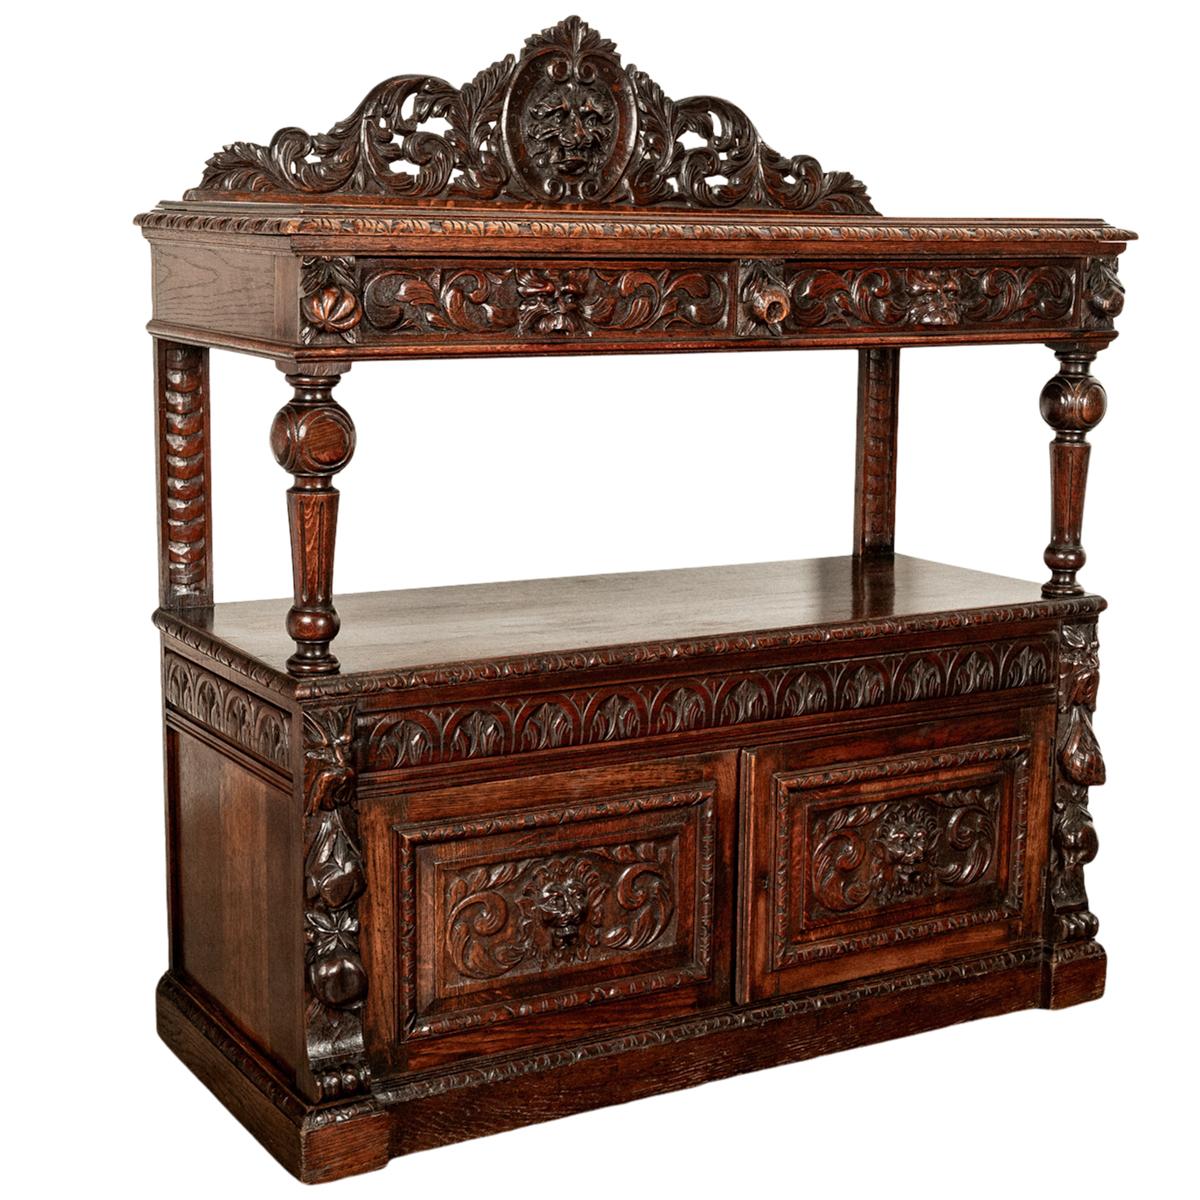 A fine antique Scottish Renaissance Revival carved oak server/ buffet, circa 1860.
This sumptuously carved buffet with a carved back crest (removeable) having a central scrolled cartouche with a lions head & surrounded with carved foliate. The top